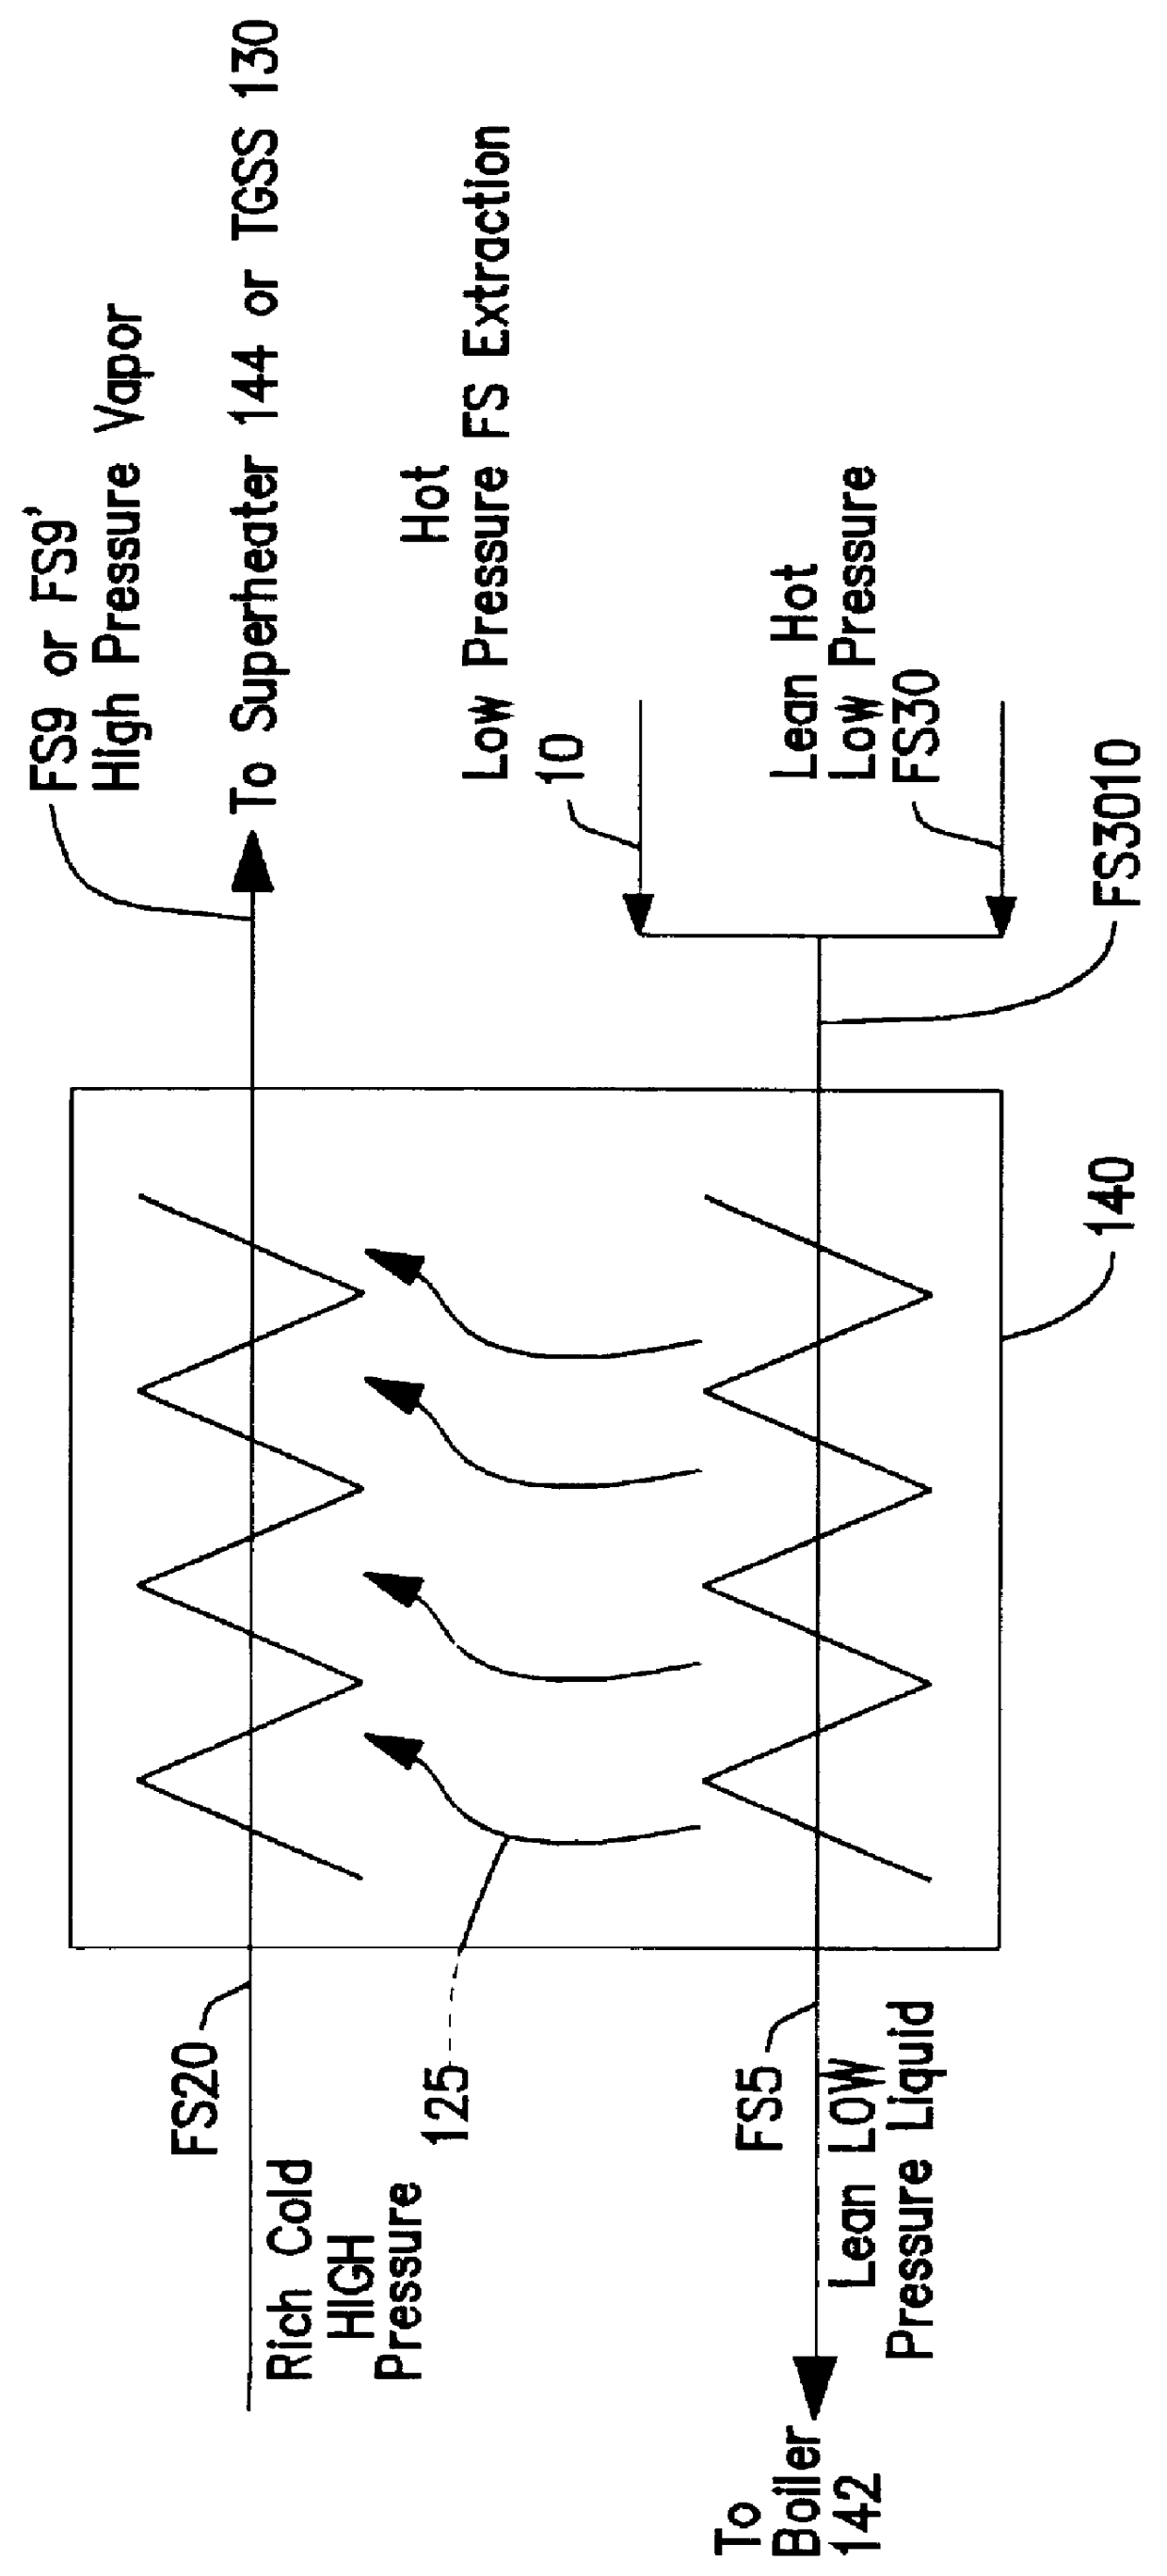 Blowdown recovery system in a Kalina cycle power generation system